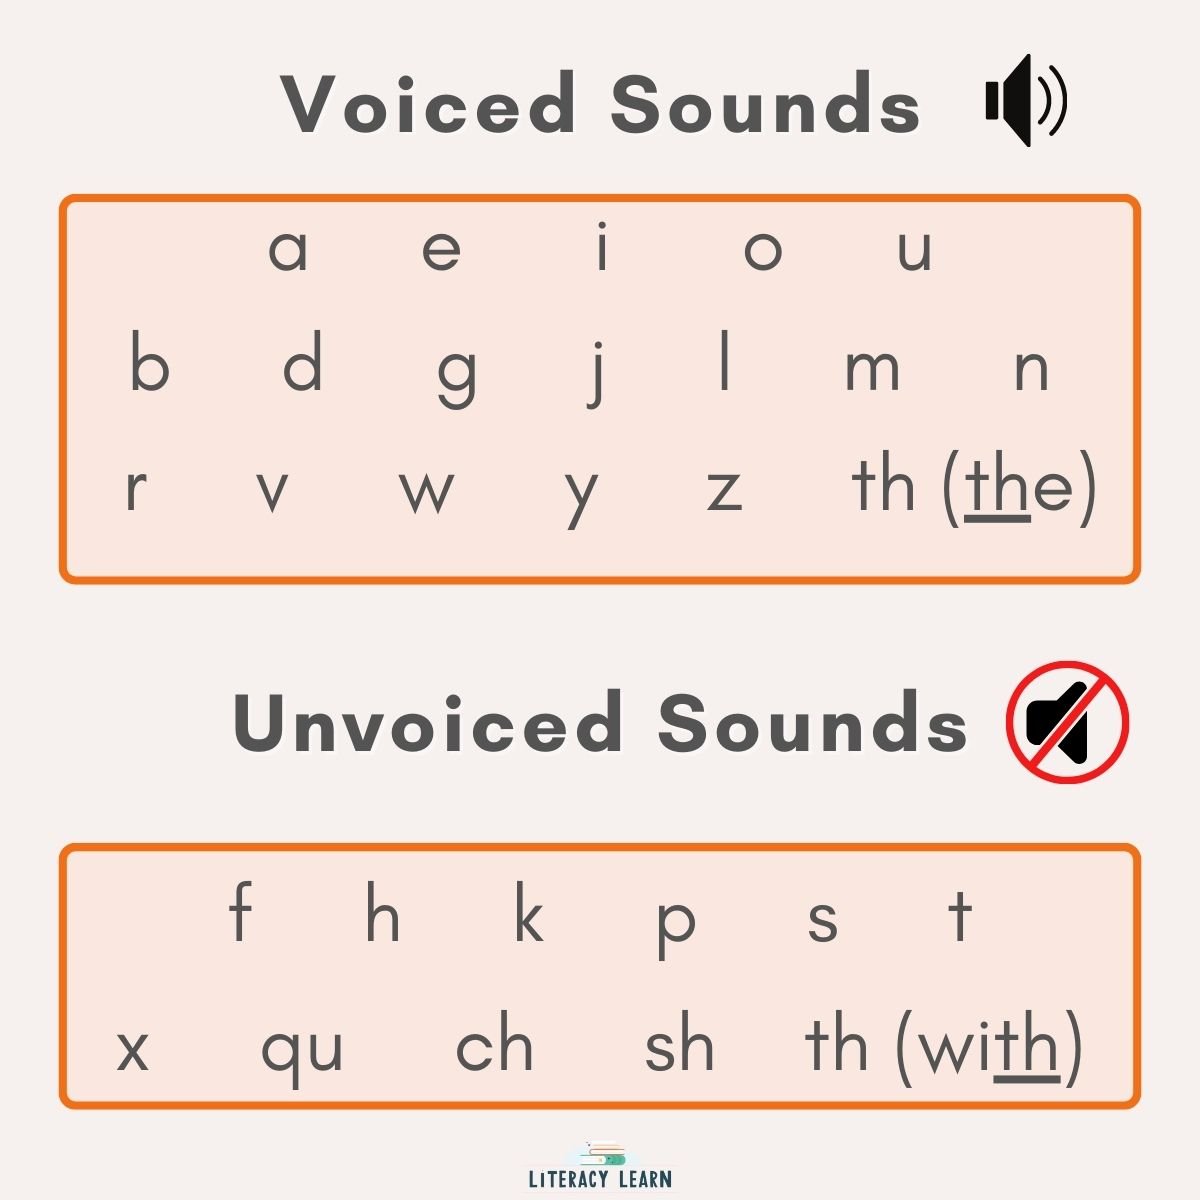 Graphic showing voiced and unvoiced sounds in lists.